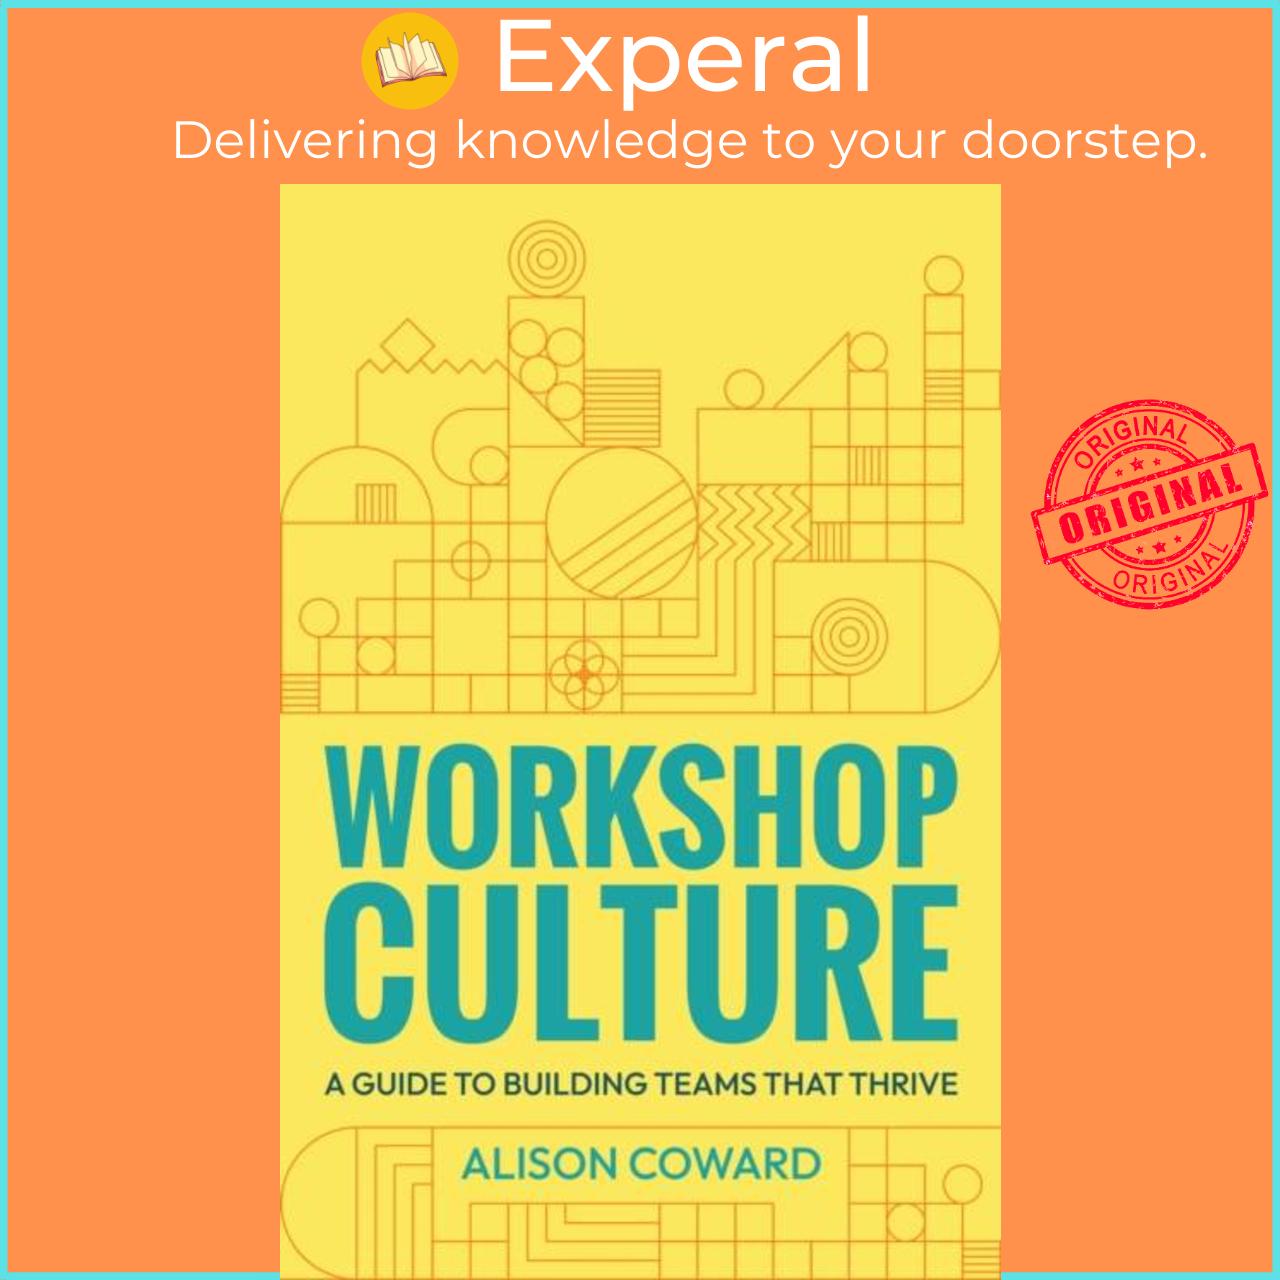 Sách - Workshop Culture - A guide to building teams that thrive by Alison Coward (UK edition, paperback)